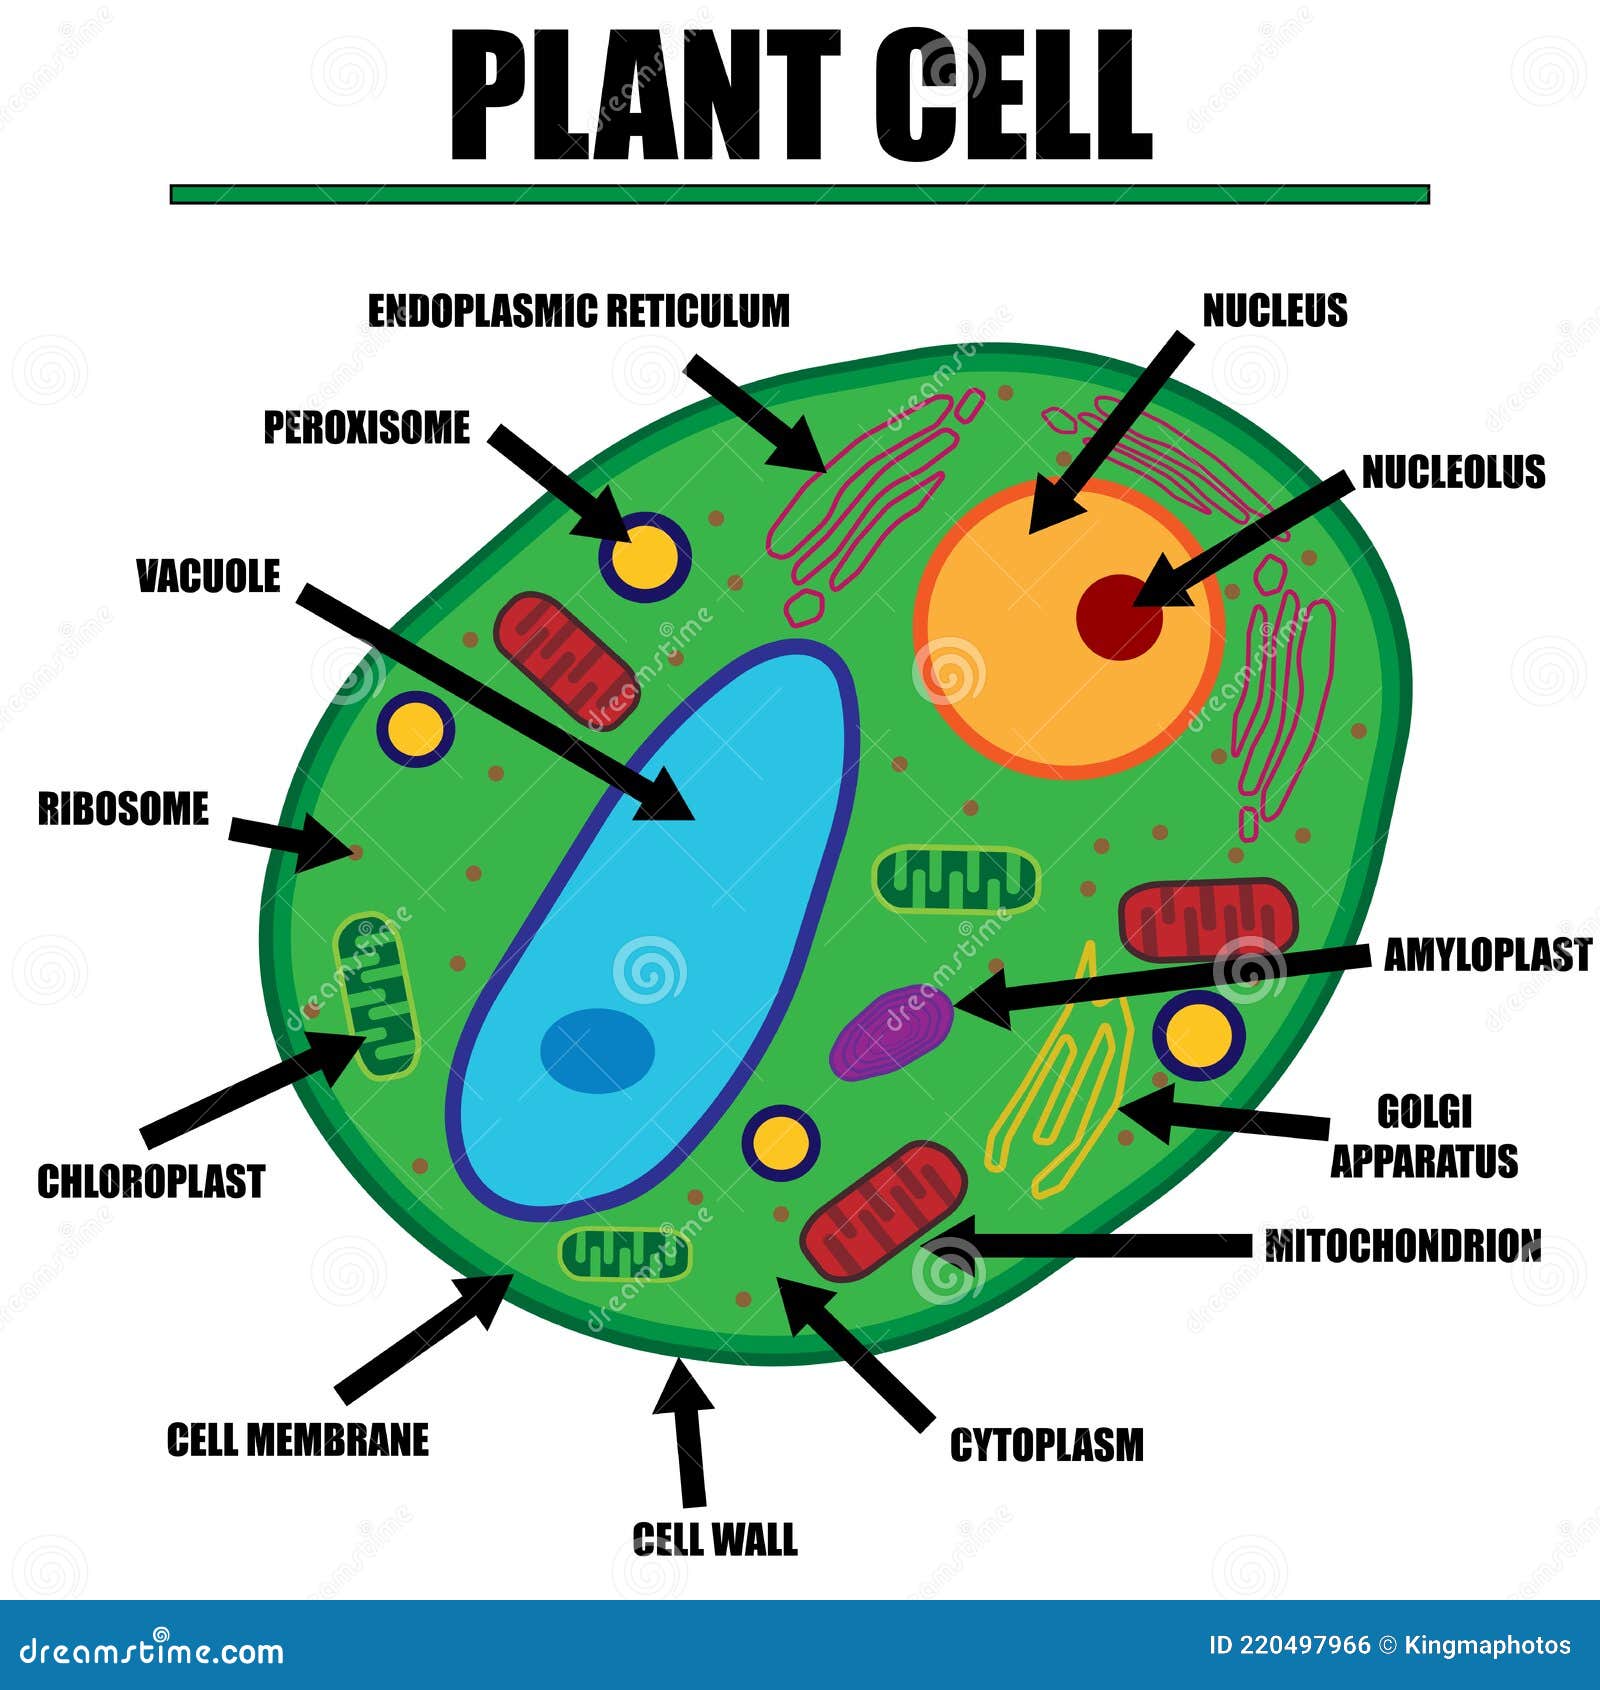 Plant Cell Color Diagram Of Organelles Inside The Cell Wall For Science And Biology Concepts Stock Vector Illustration Of Chloroplasts Inside 220497966